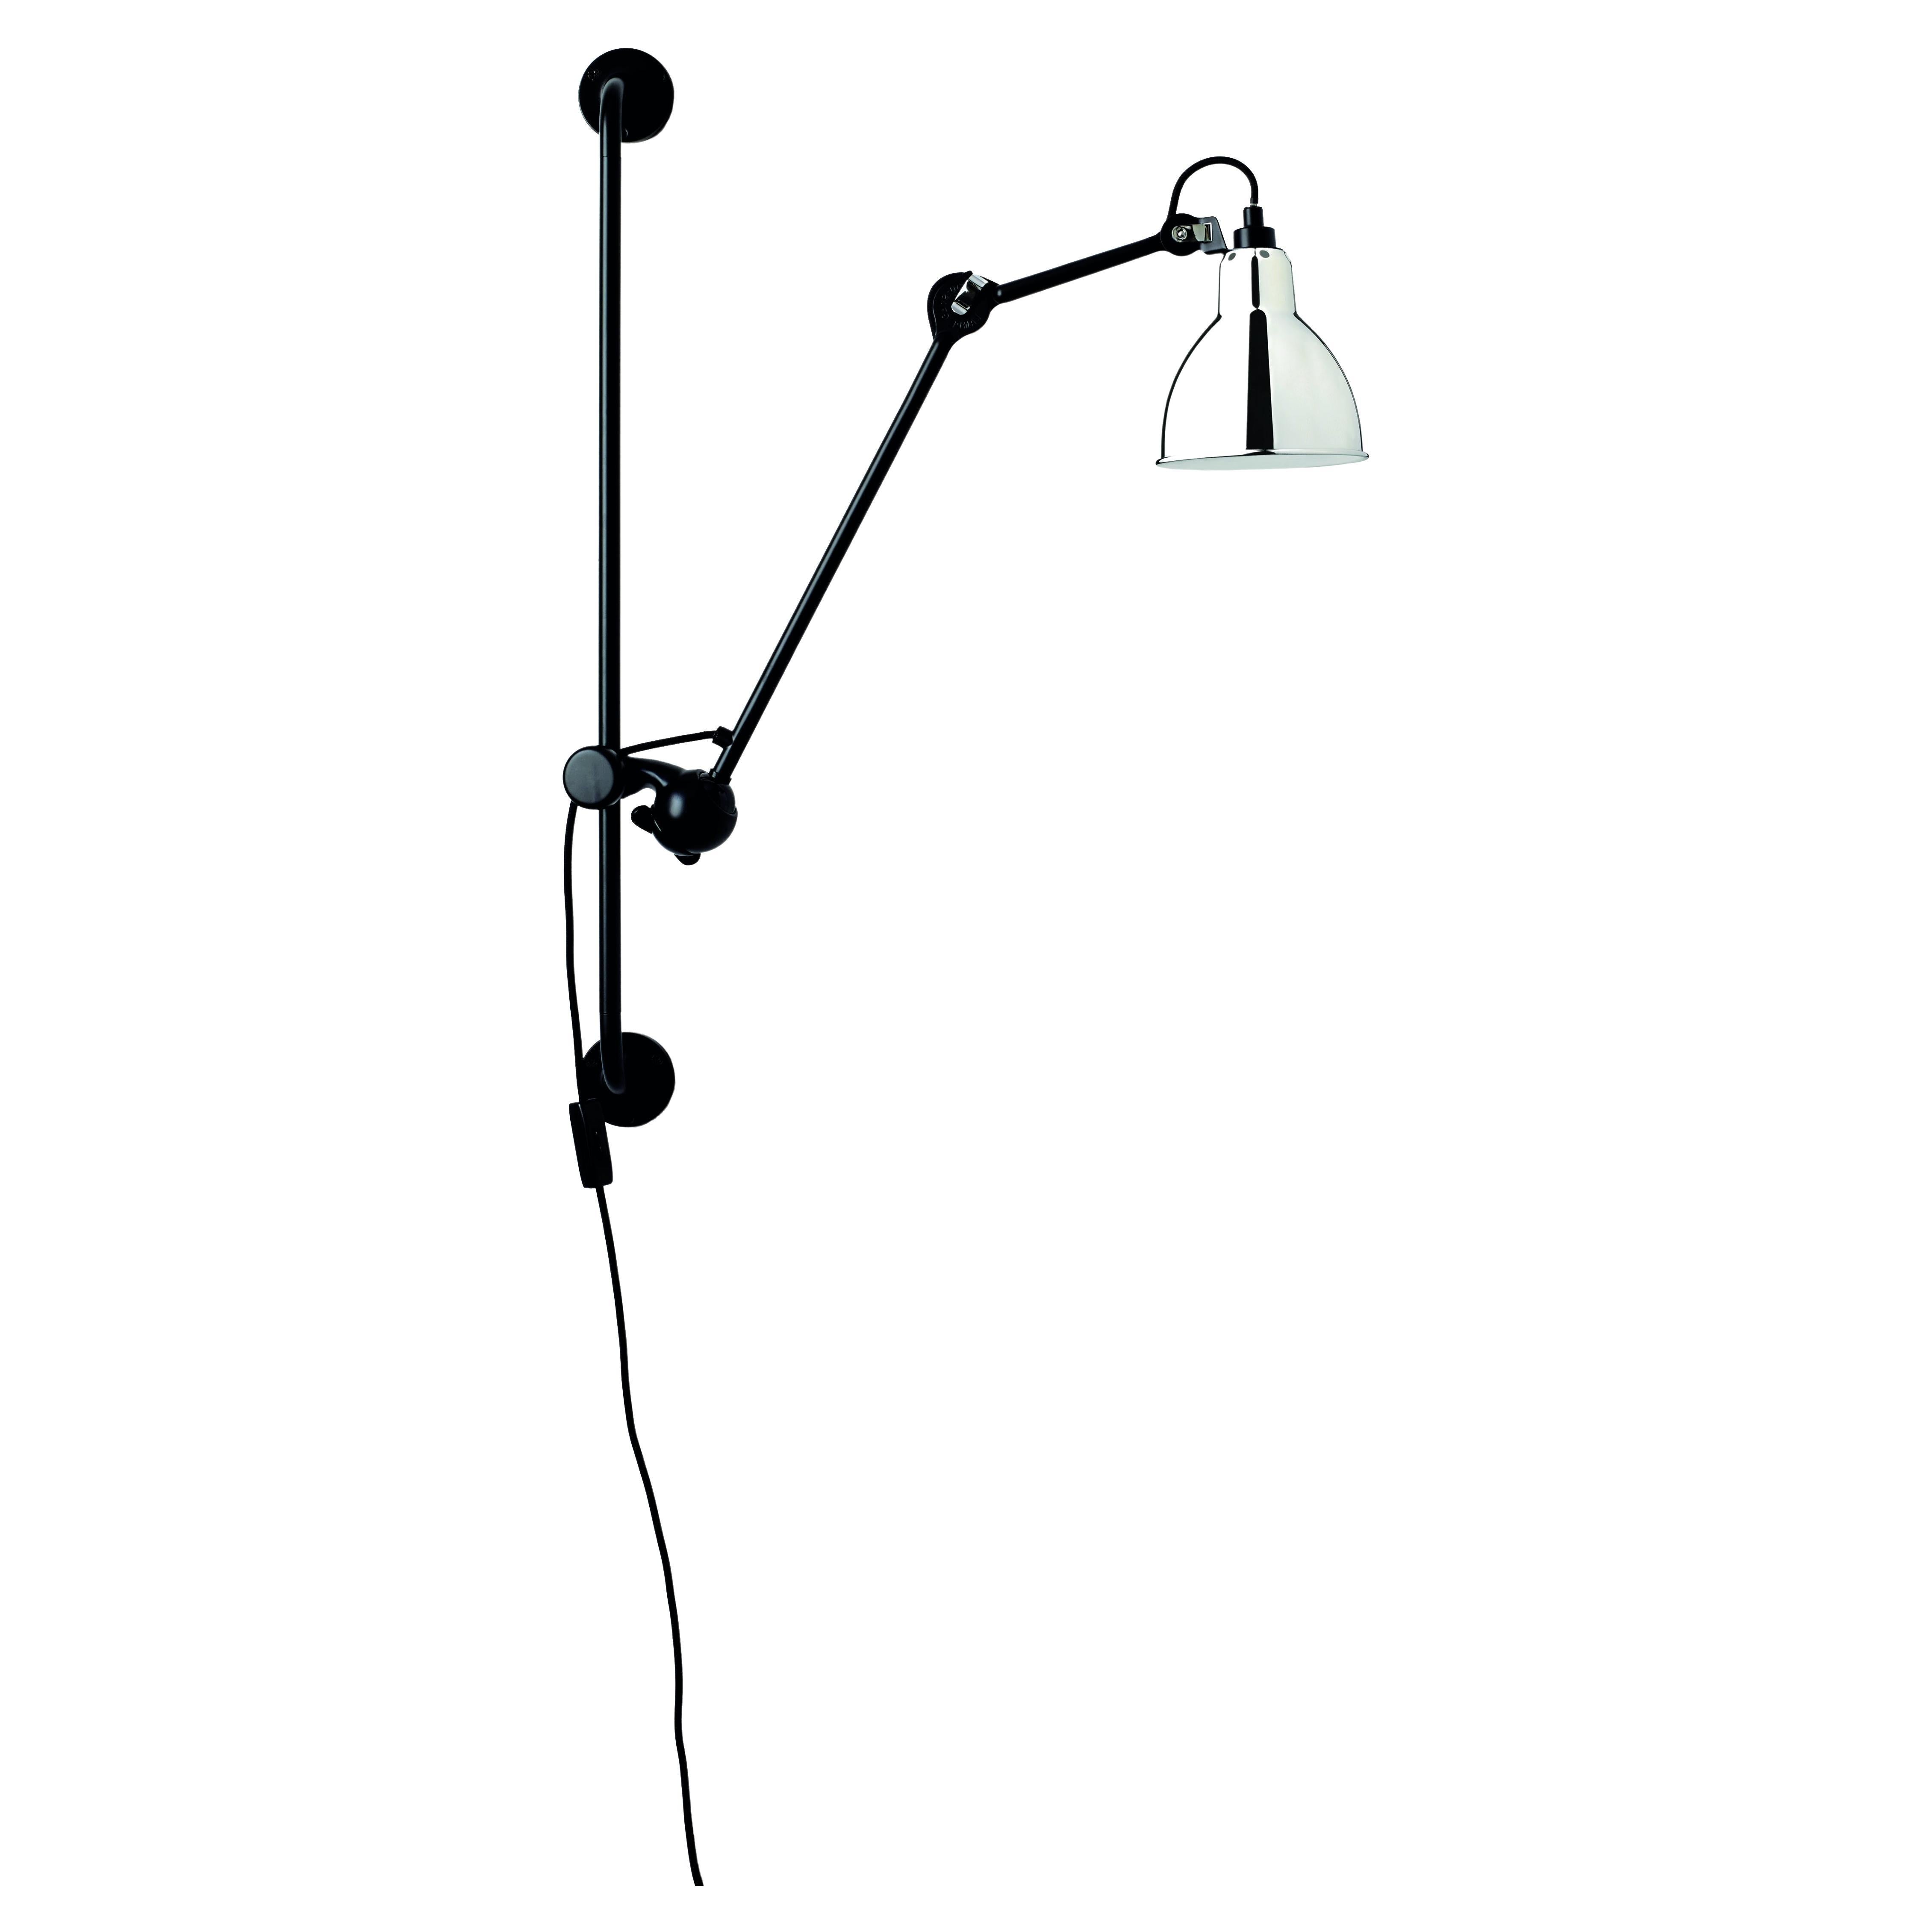 DCW Editions La Lampe Gras N°210 Wall Lamp in Black Arm and Chrome Shade